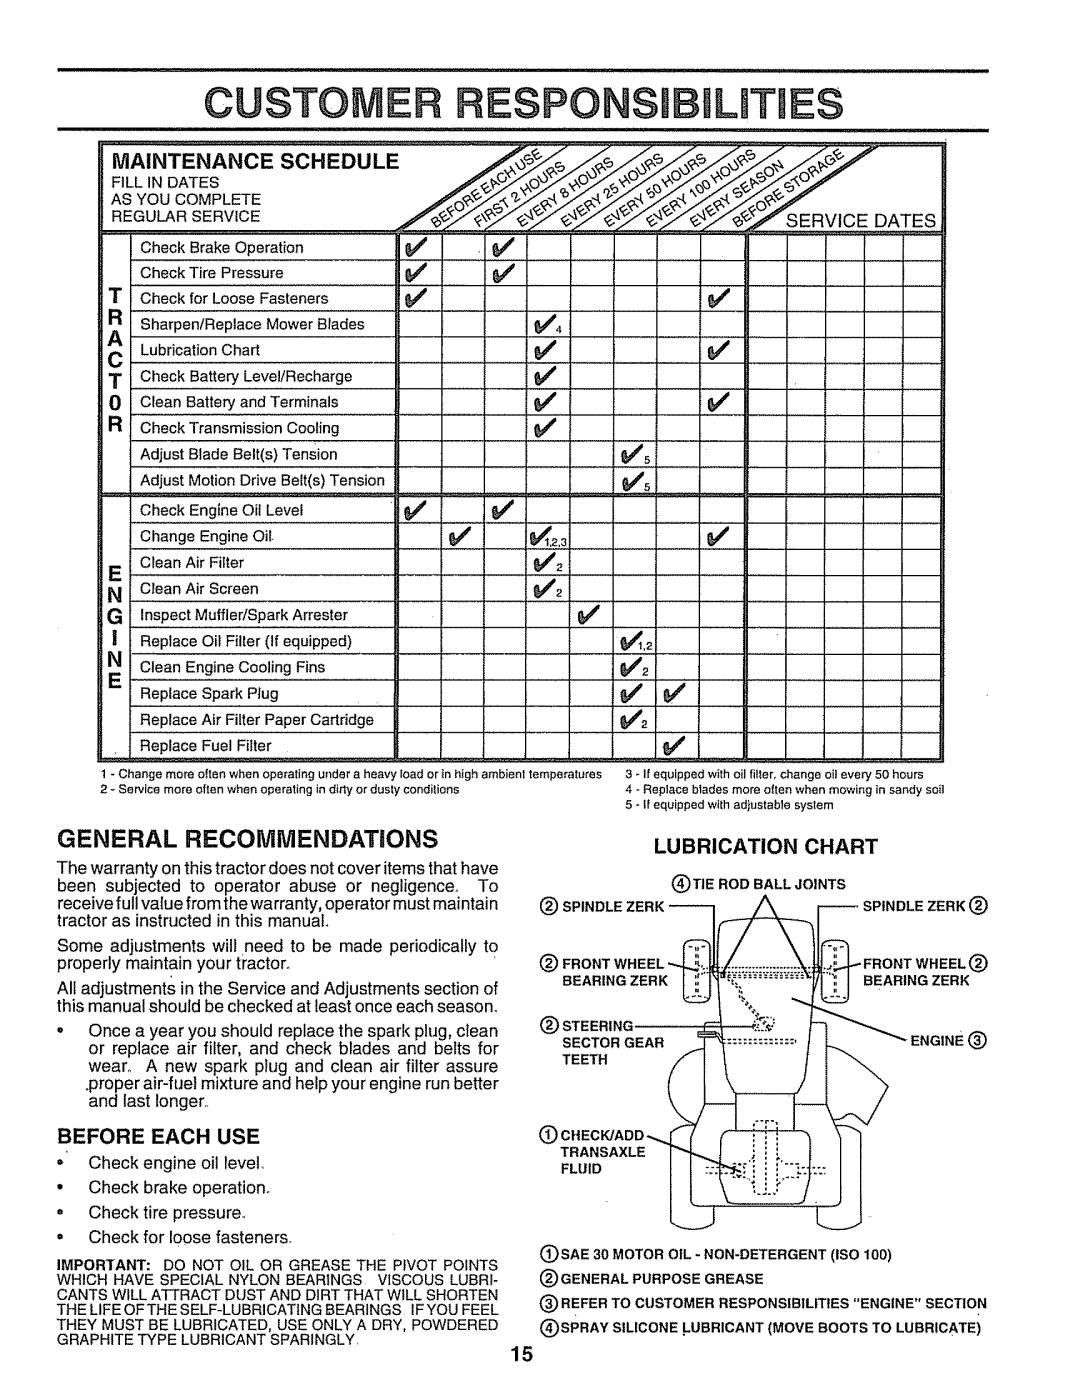 Sears 917.25597 General Recommendations, Maintenance, Before Each Use, Lubrication Chart, Custom, ESPONSmBIL, Schedule 